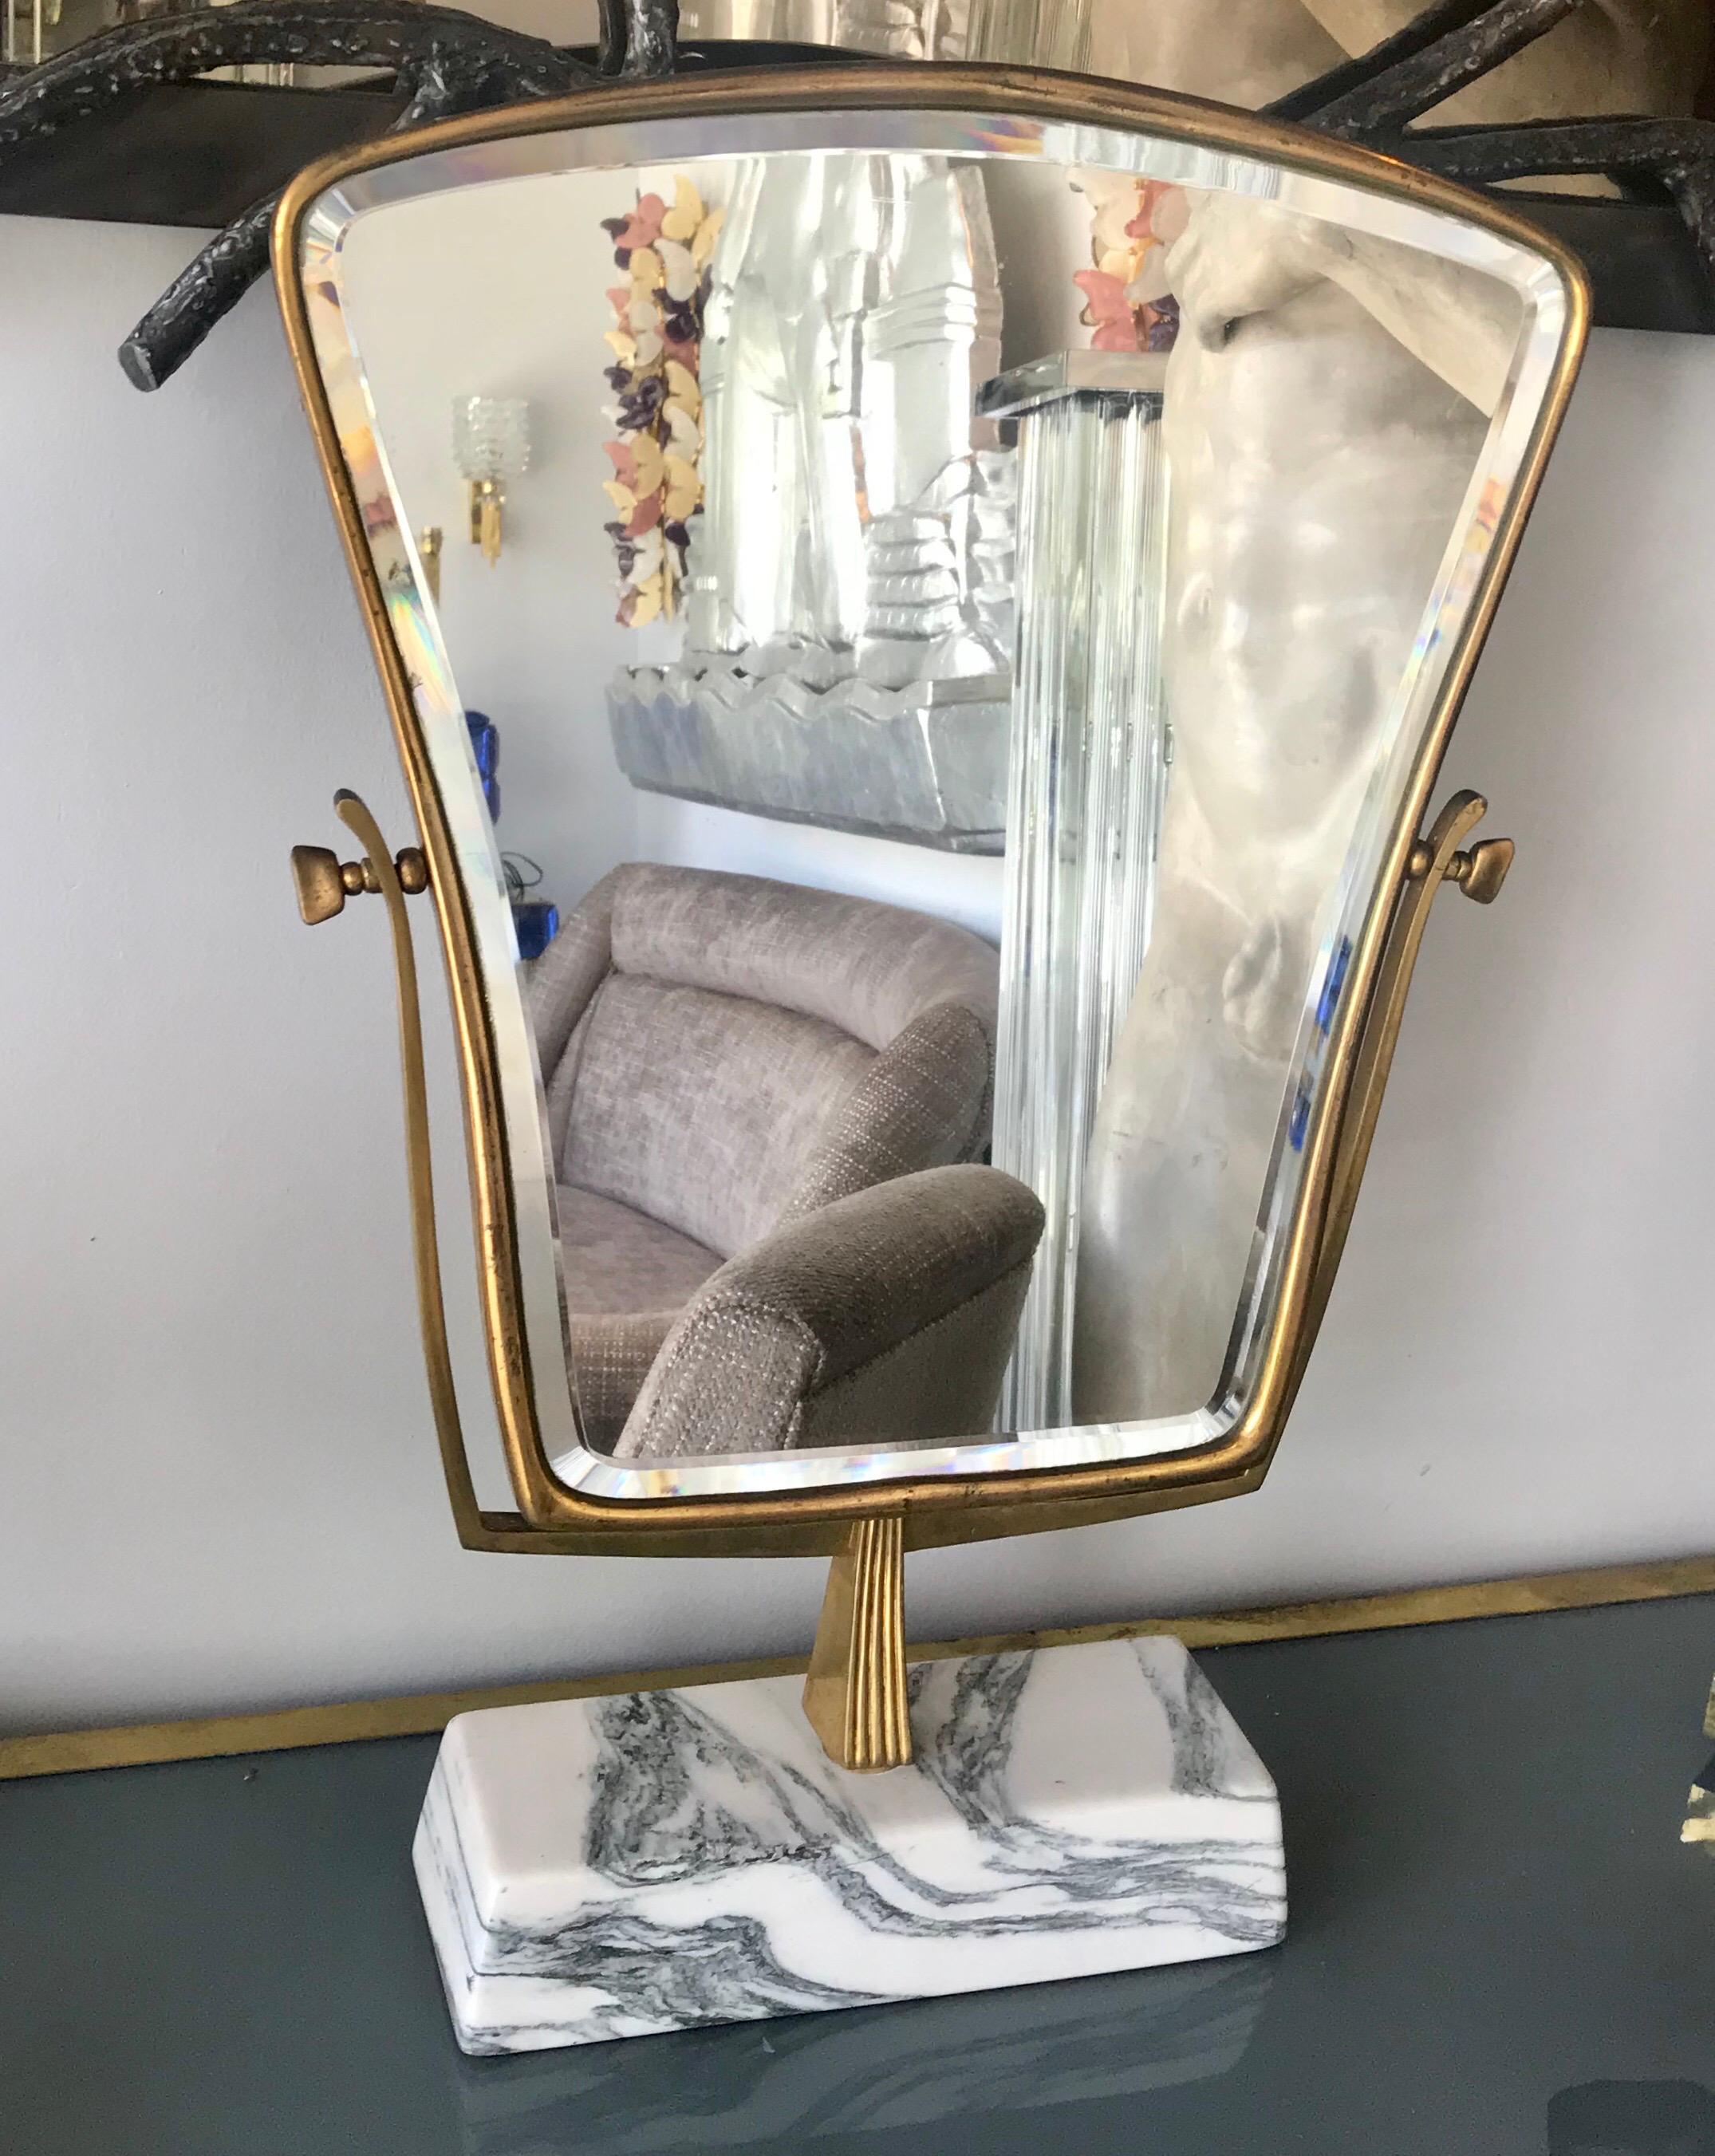 Beautiful Gio Ponti Italian table/vanity mirror of brass with white Carrara marble base, circa 1960s
The mirror is beveled and the overall condition is very good.